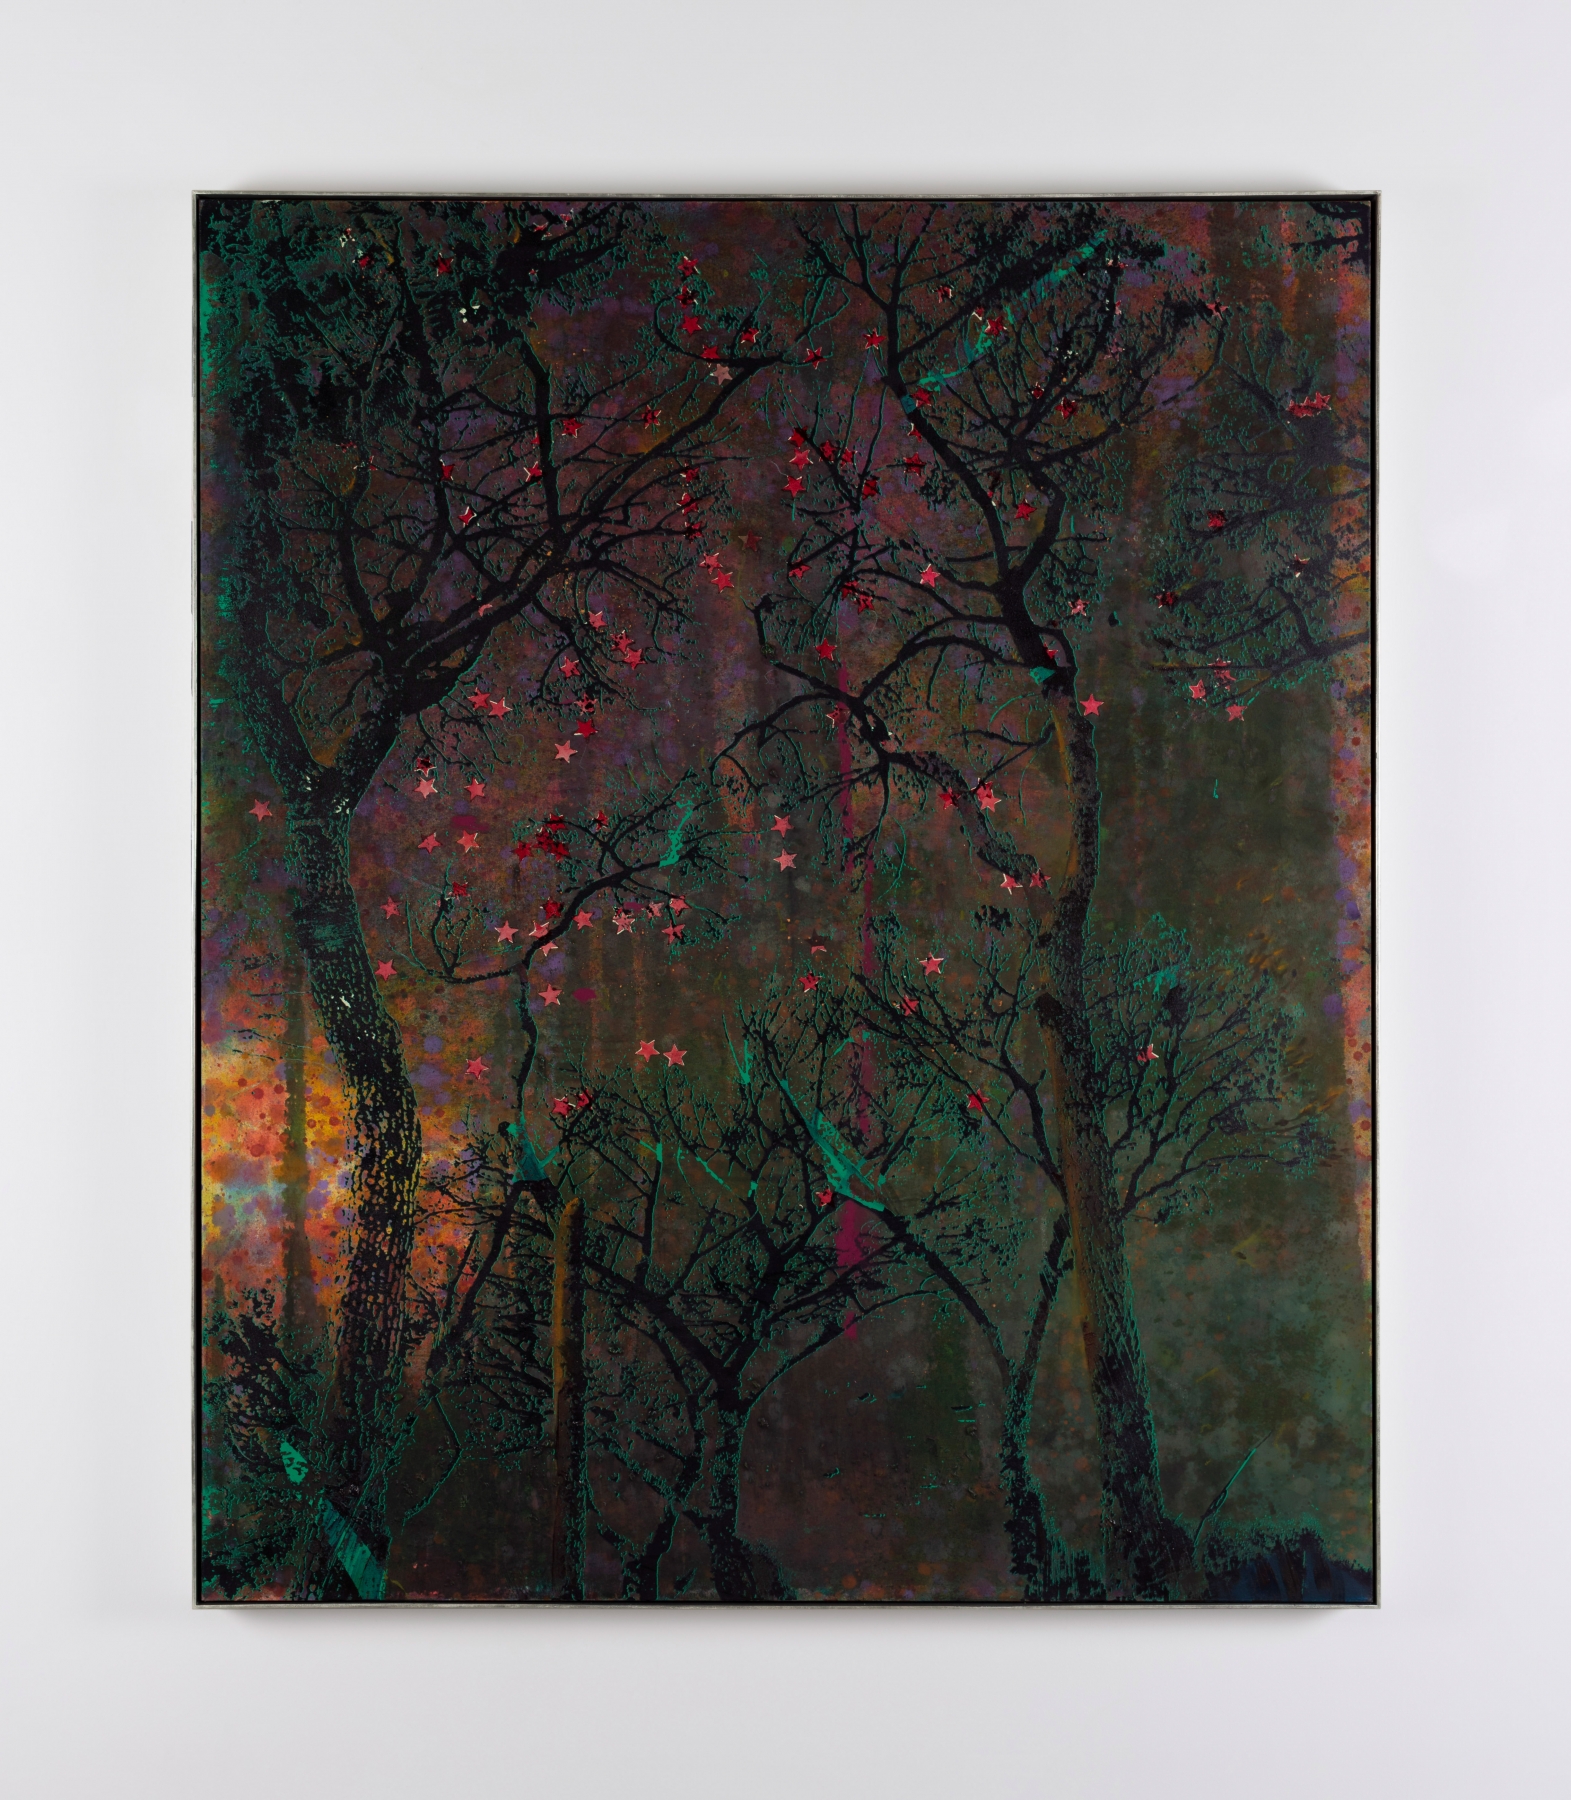 Elizabeth Magill&nbsp;
Red Stars,&nbsp;2021
oil and mixed media on canvas,&nbsp;hand-gilded silver and painted clay frame
185.5 x 155.5 cm / 73 x 61.2 in framed